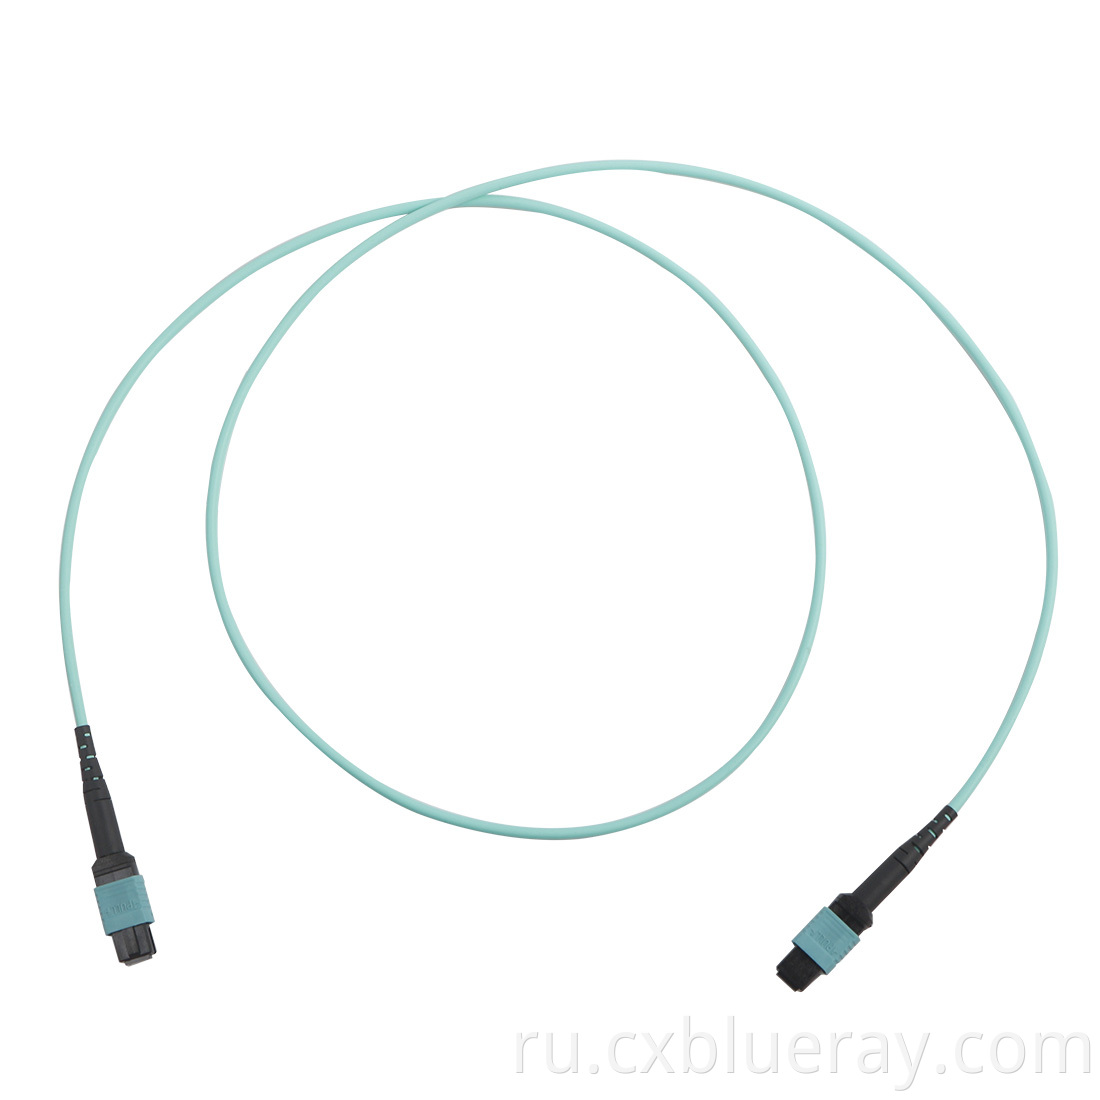 Mtp Trunk Cable